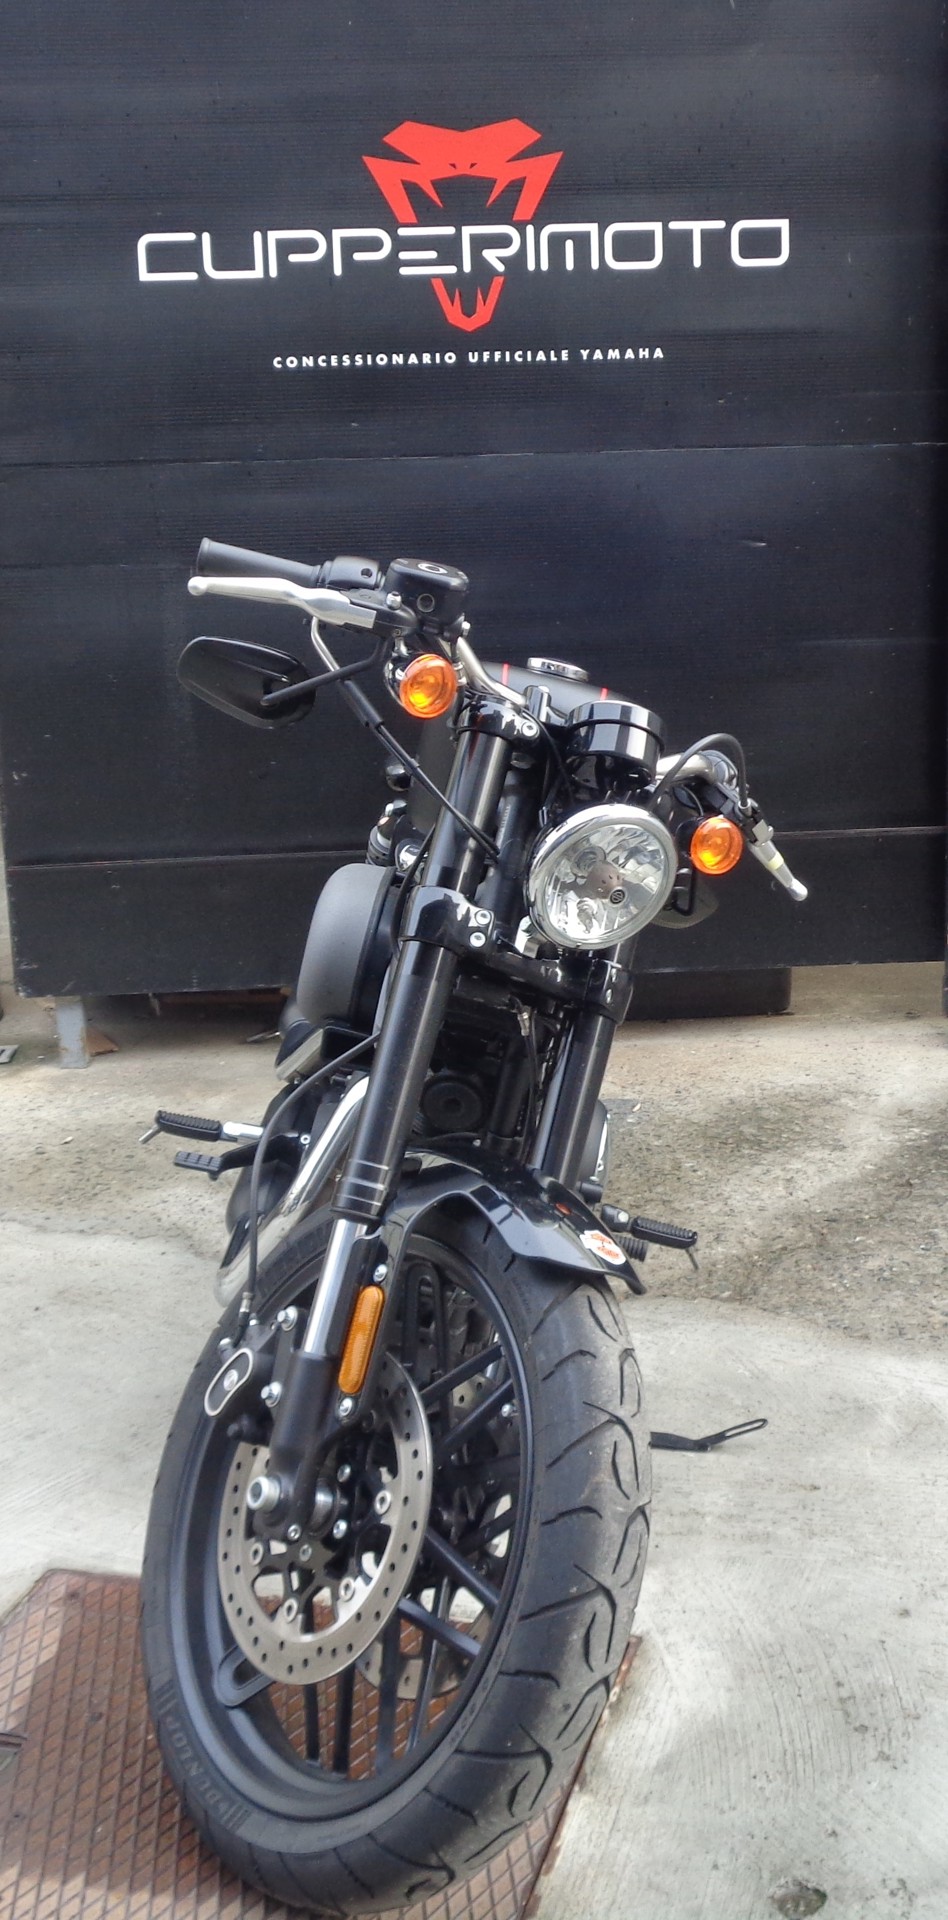 Harley-Davidson Sportster 1200 Roadster ABS usata disponibile a TO